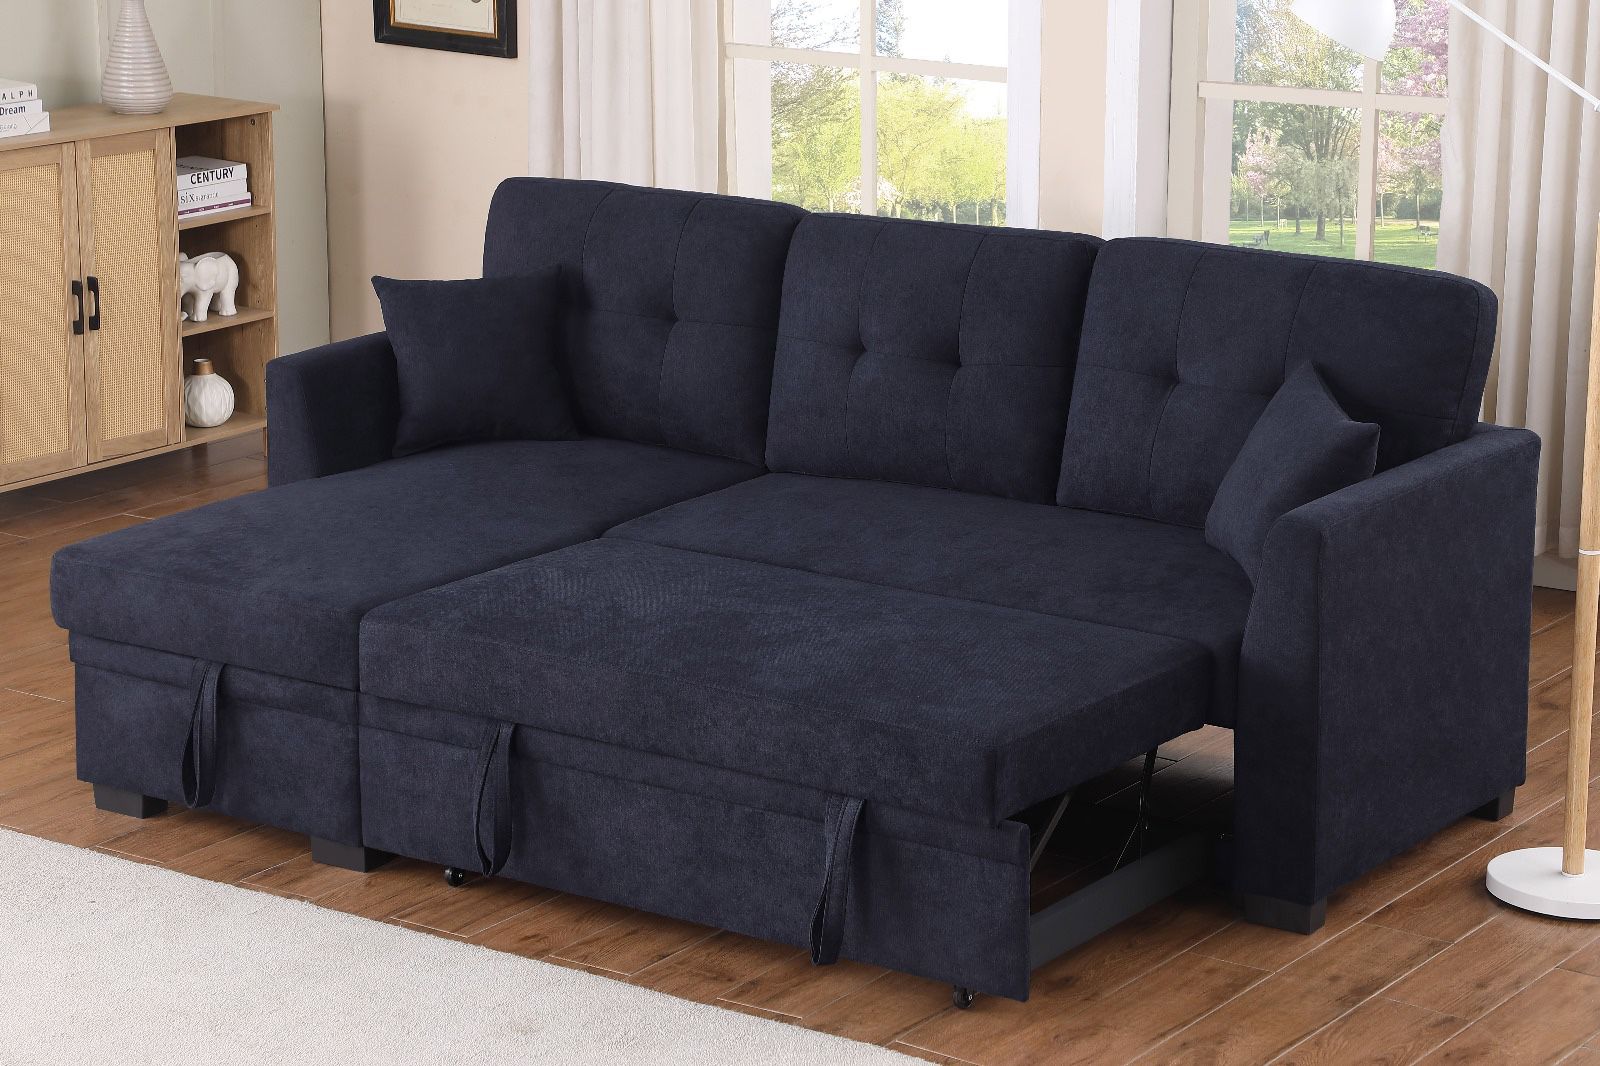 !New!! Pull Out Sofa Bed, Sectional Sofa Bed, Sofabed, couch, Sectional Sofa With Storage, Sleeper Sofa, Pull-out Bed Sofa